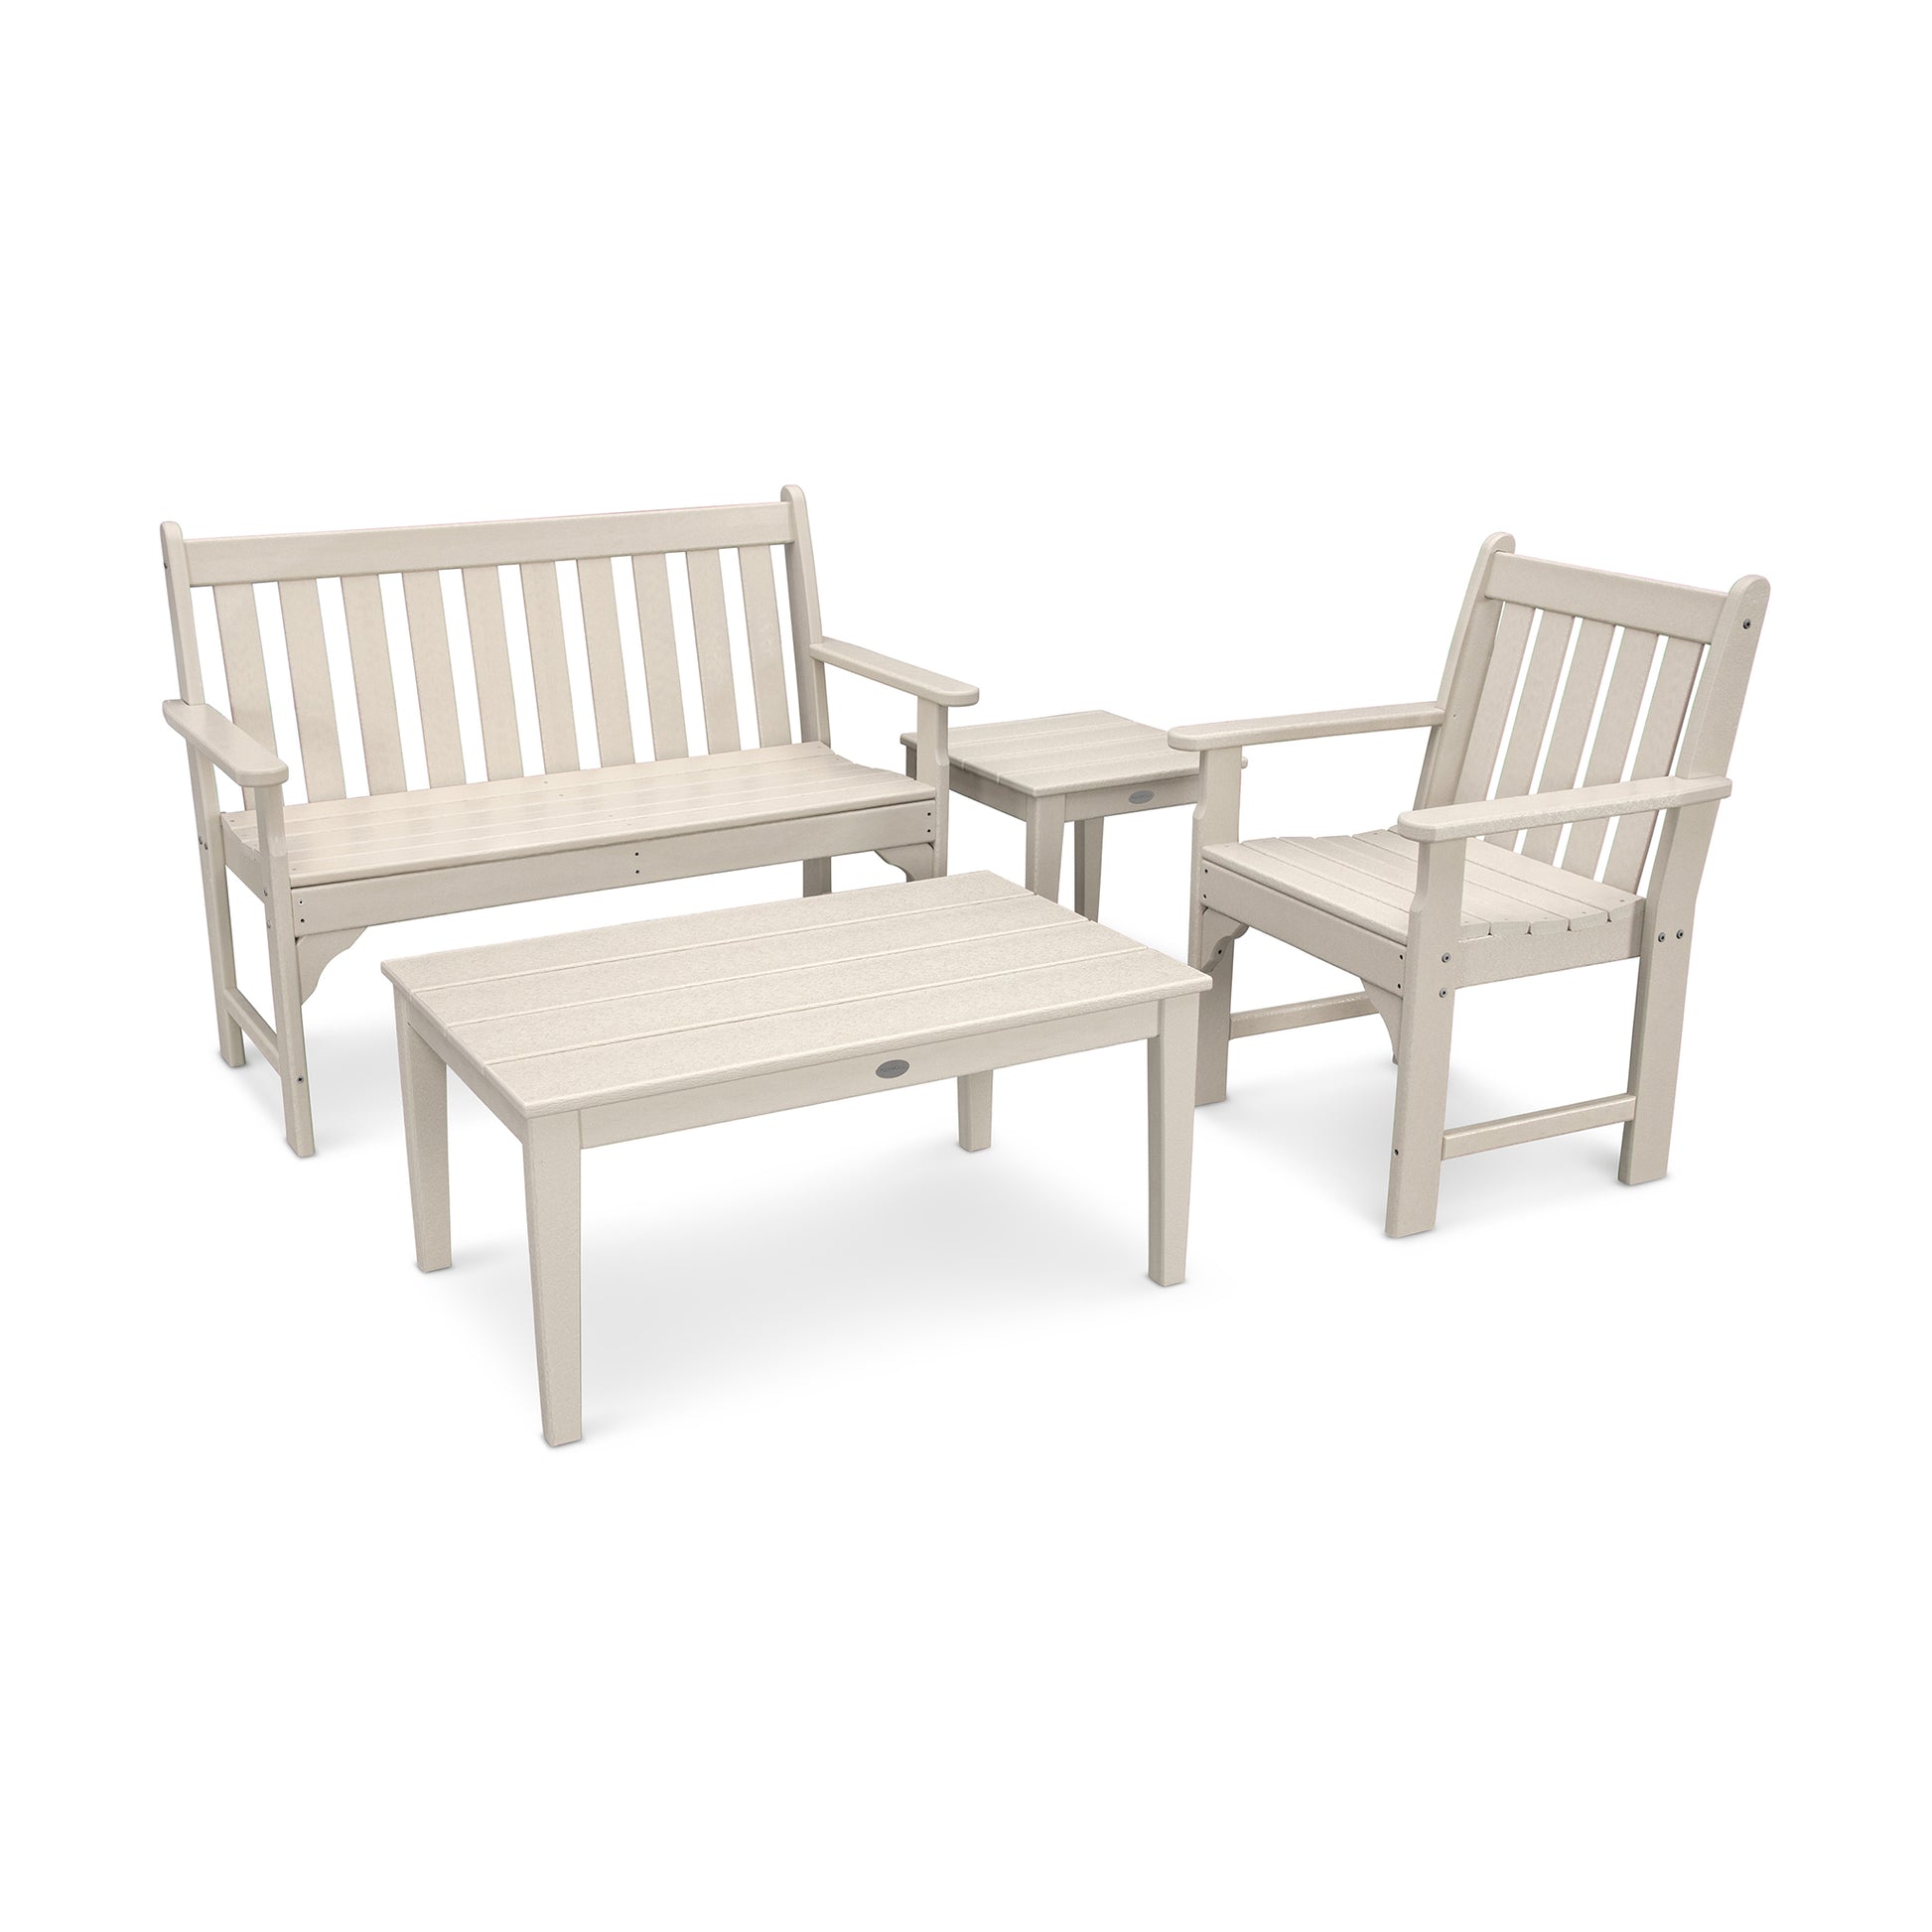 A set of POLYWOOD Vineyard 4-Piece Bench Seating Set in a light beige color, consisting of a bench, two chairs, and a rectangular coffee table, displayed against a white background.